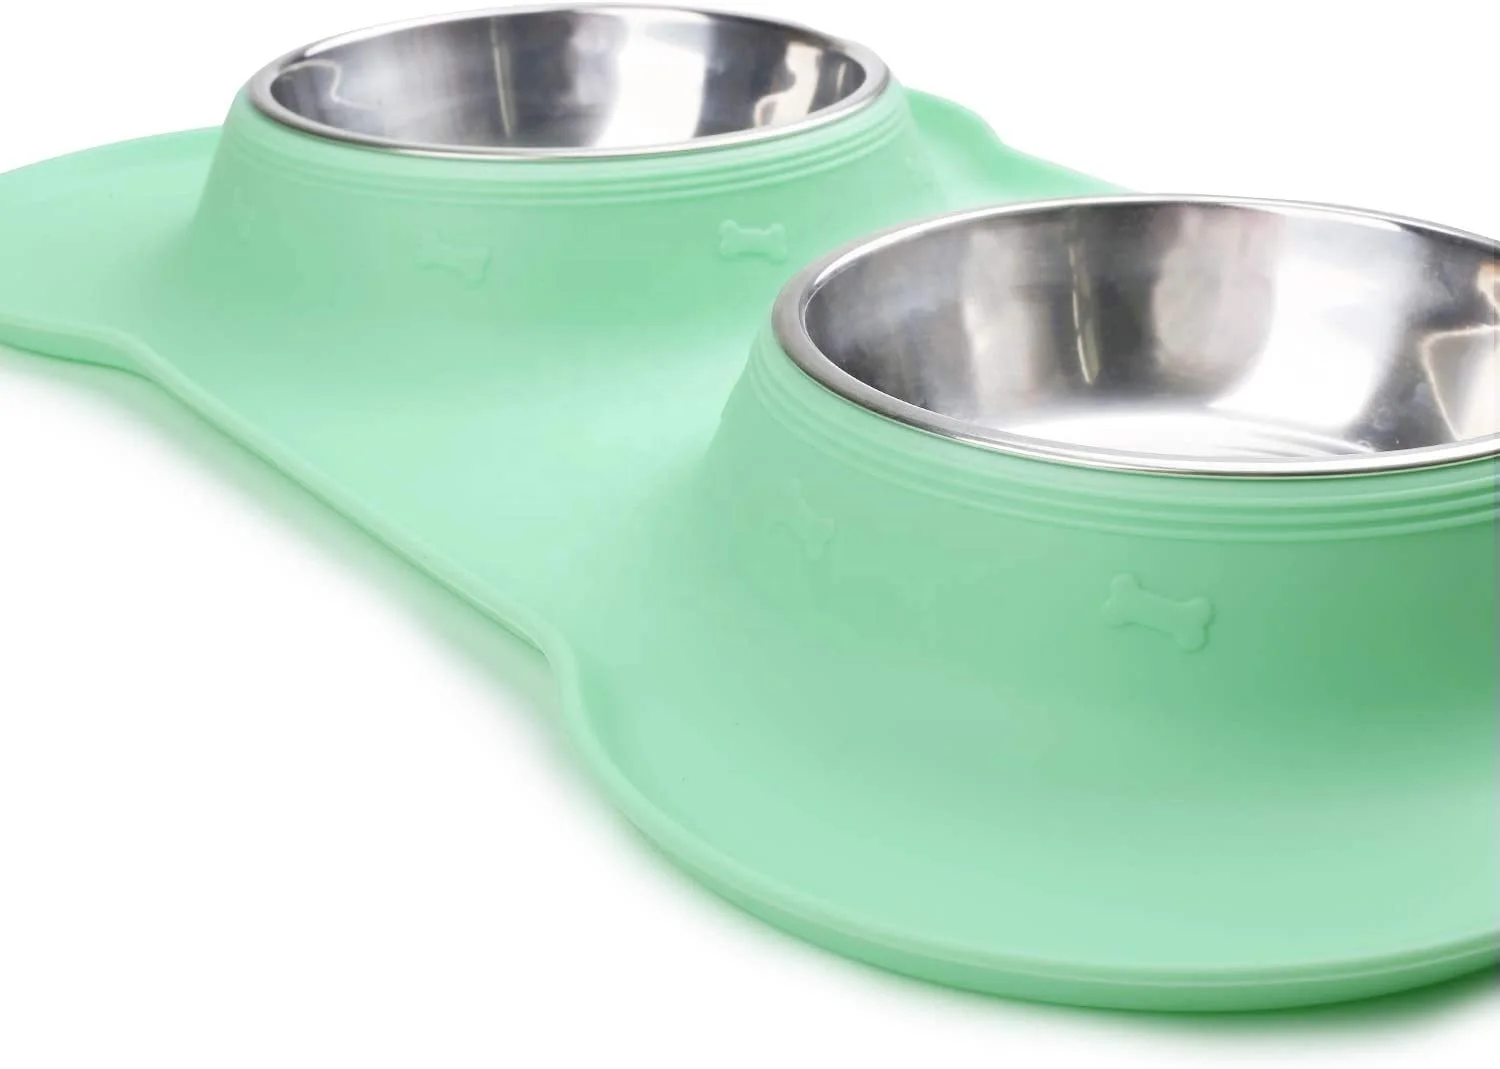 colorful pet dog Food Tray Plate portable folding rubber pet bowls